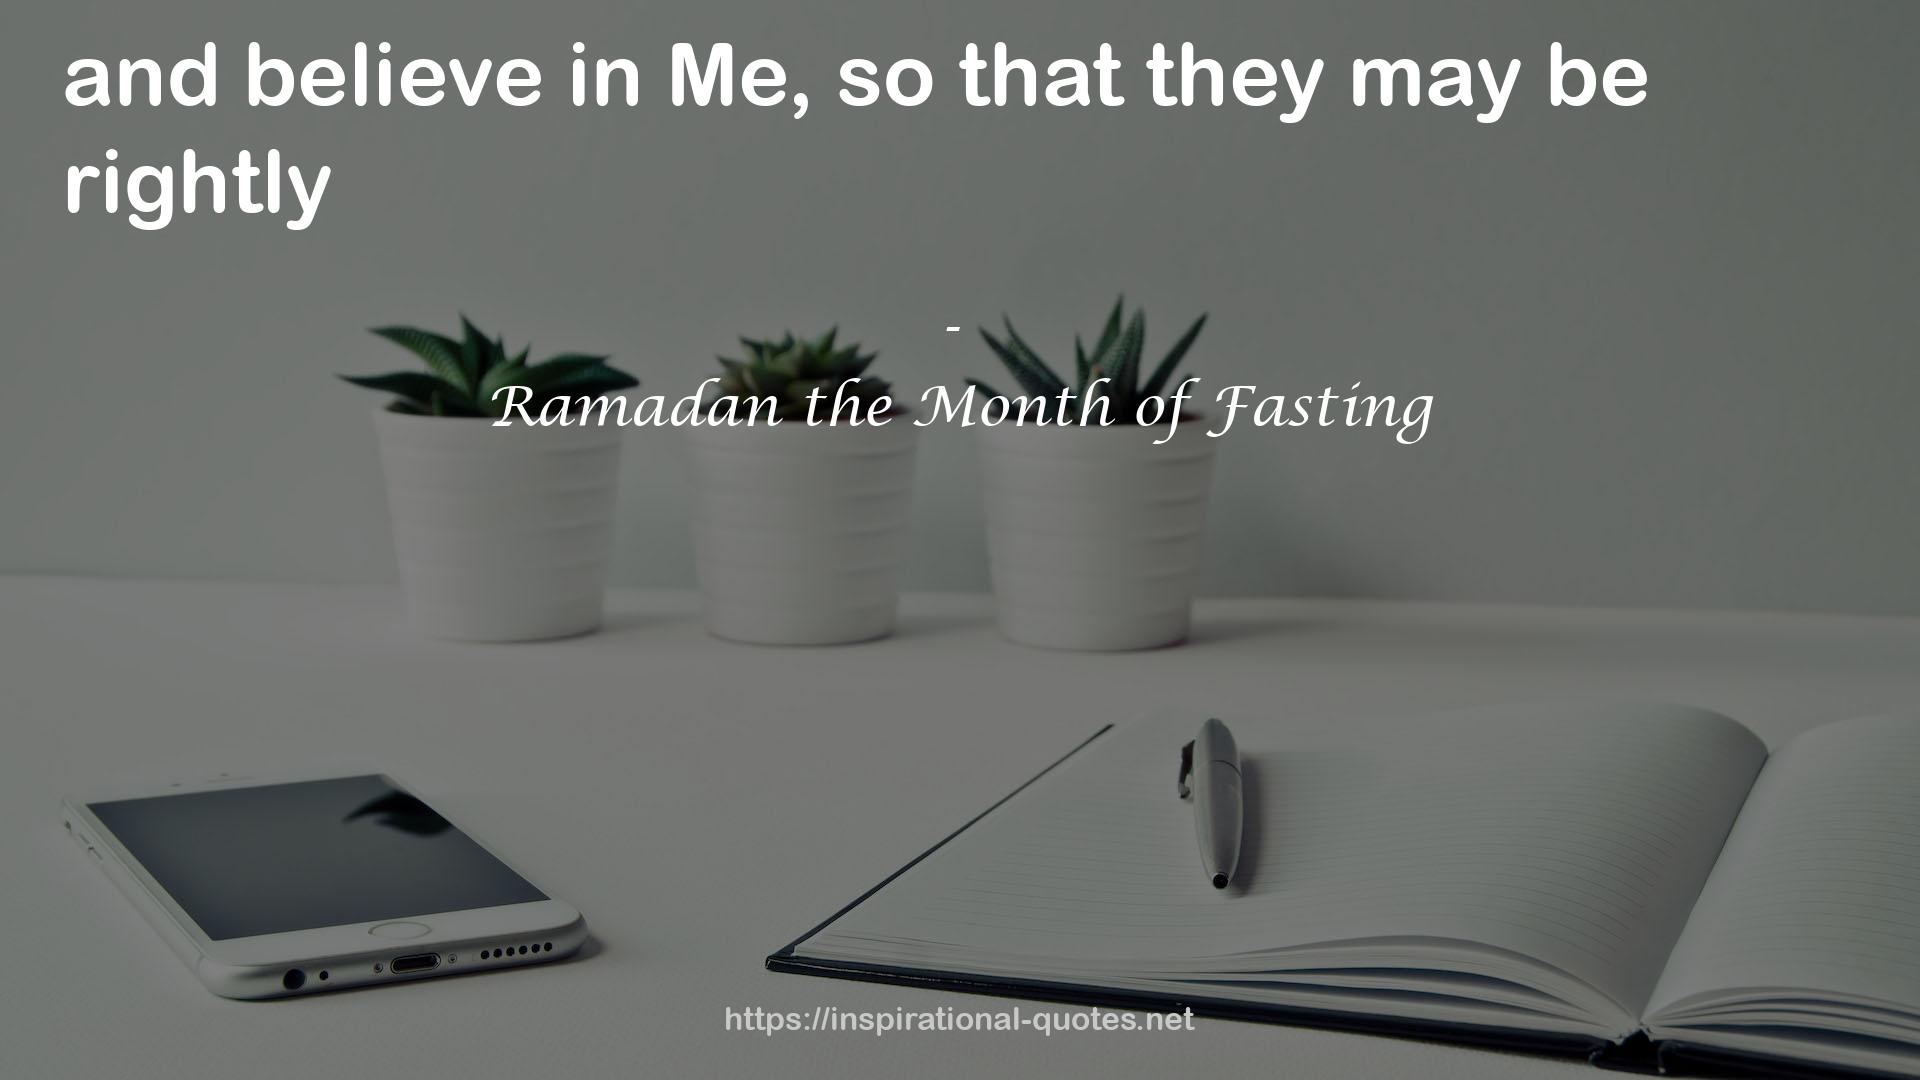 Ramadan the Month of Fasting QUOTES